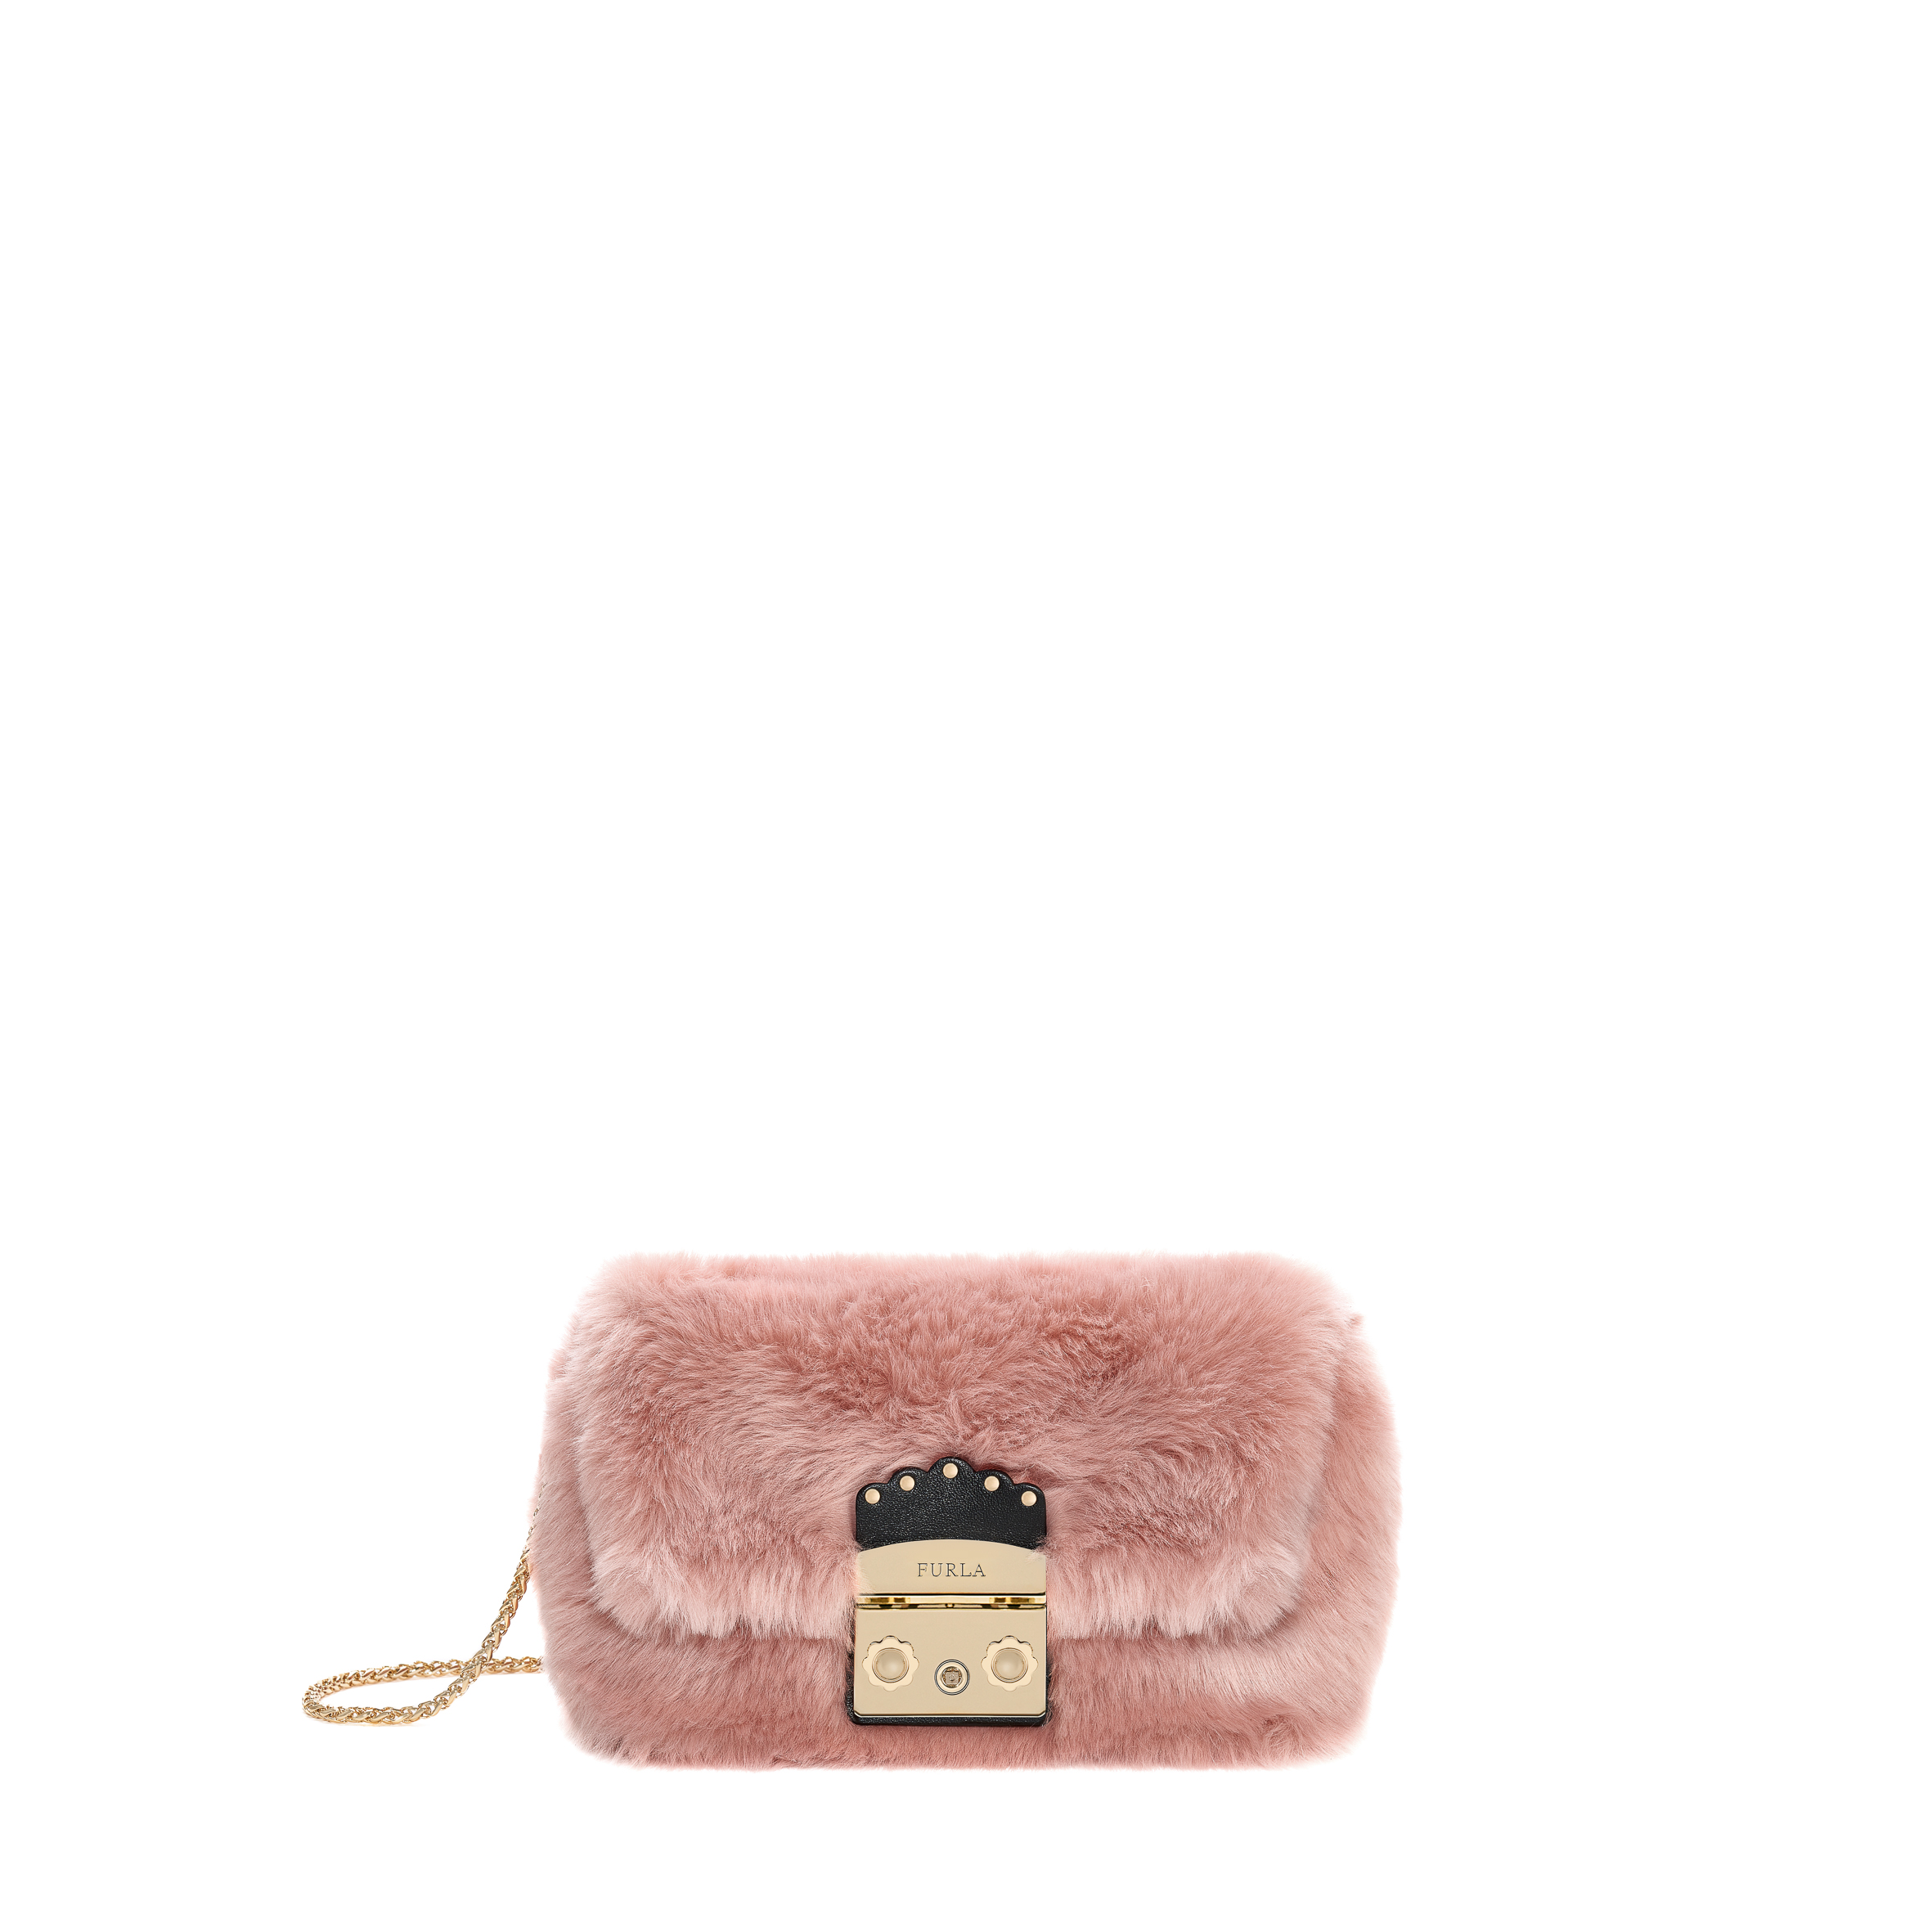 FURLA LAUNCHES ‘THE FURLA SOCIETY’ | WHAT WE ADORE